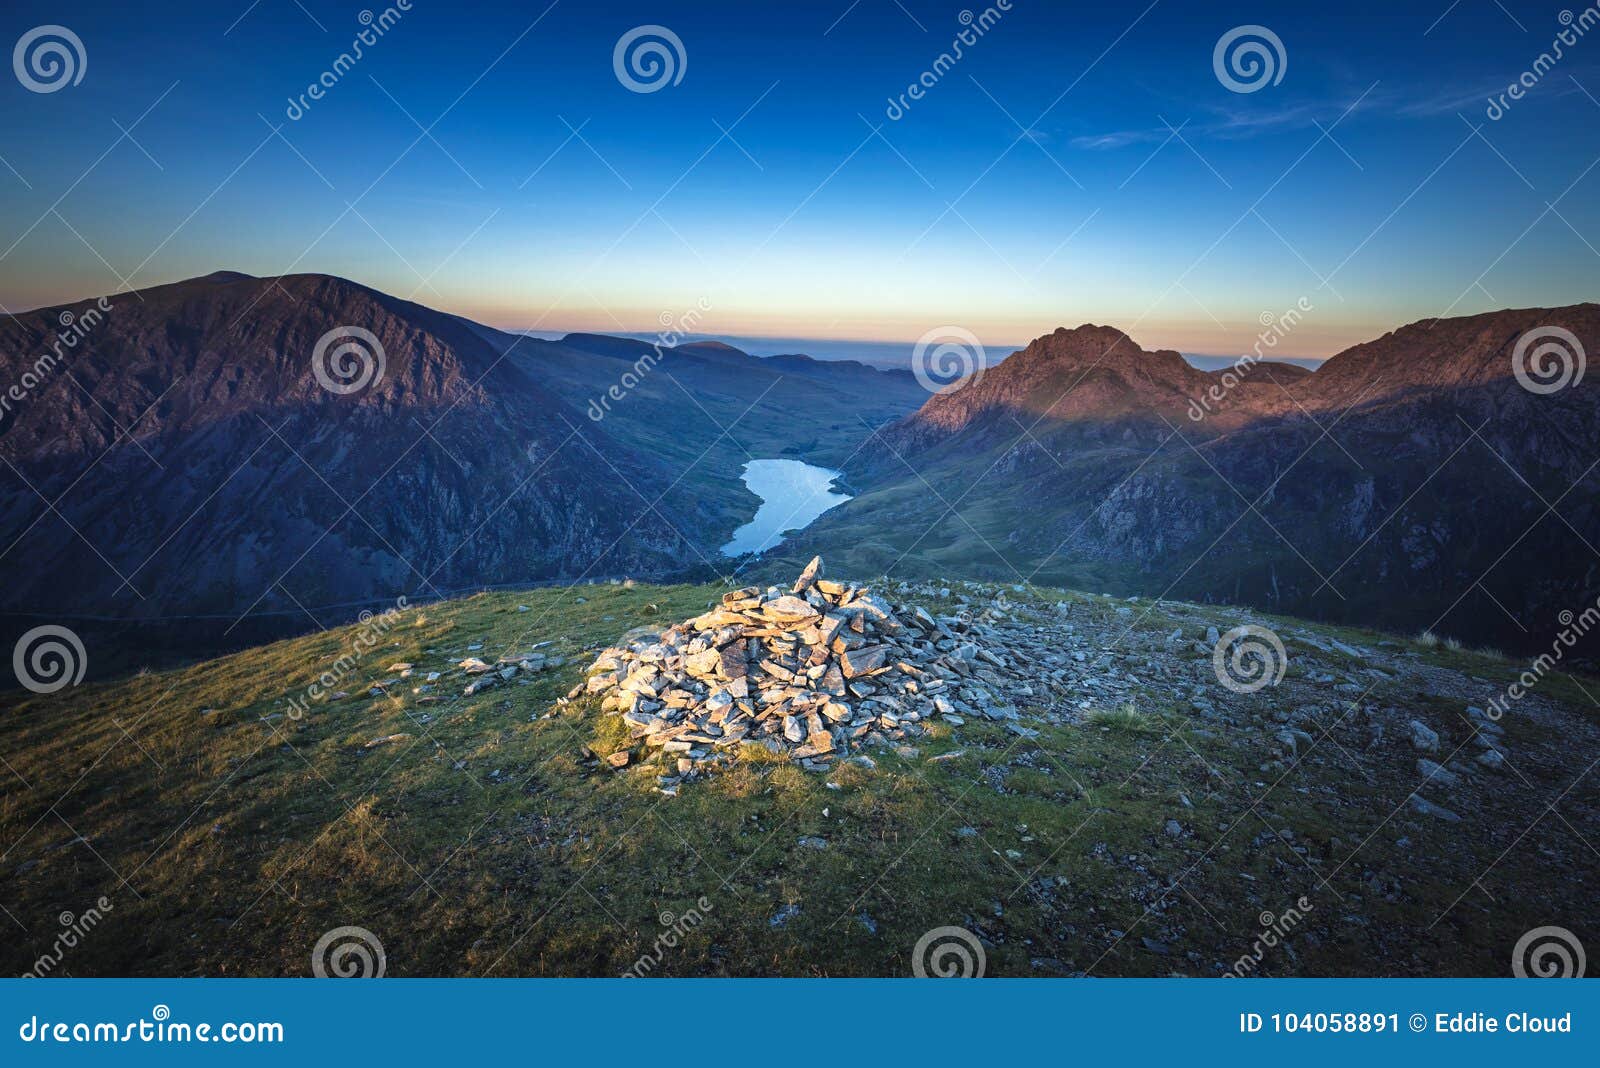 Ogwen Valley Aerial Sunset View from Y Garn Top Stock Image - Image of holiday: 104058891